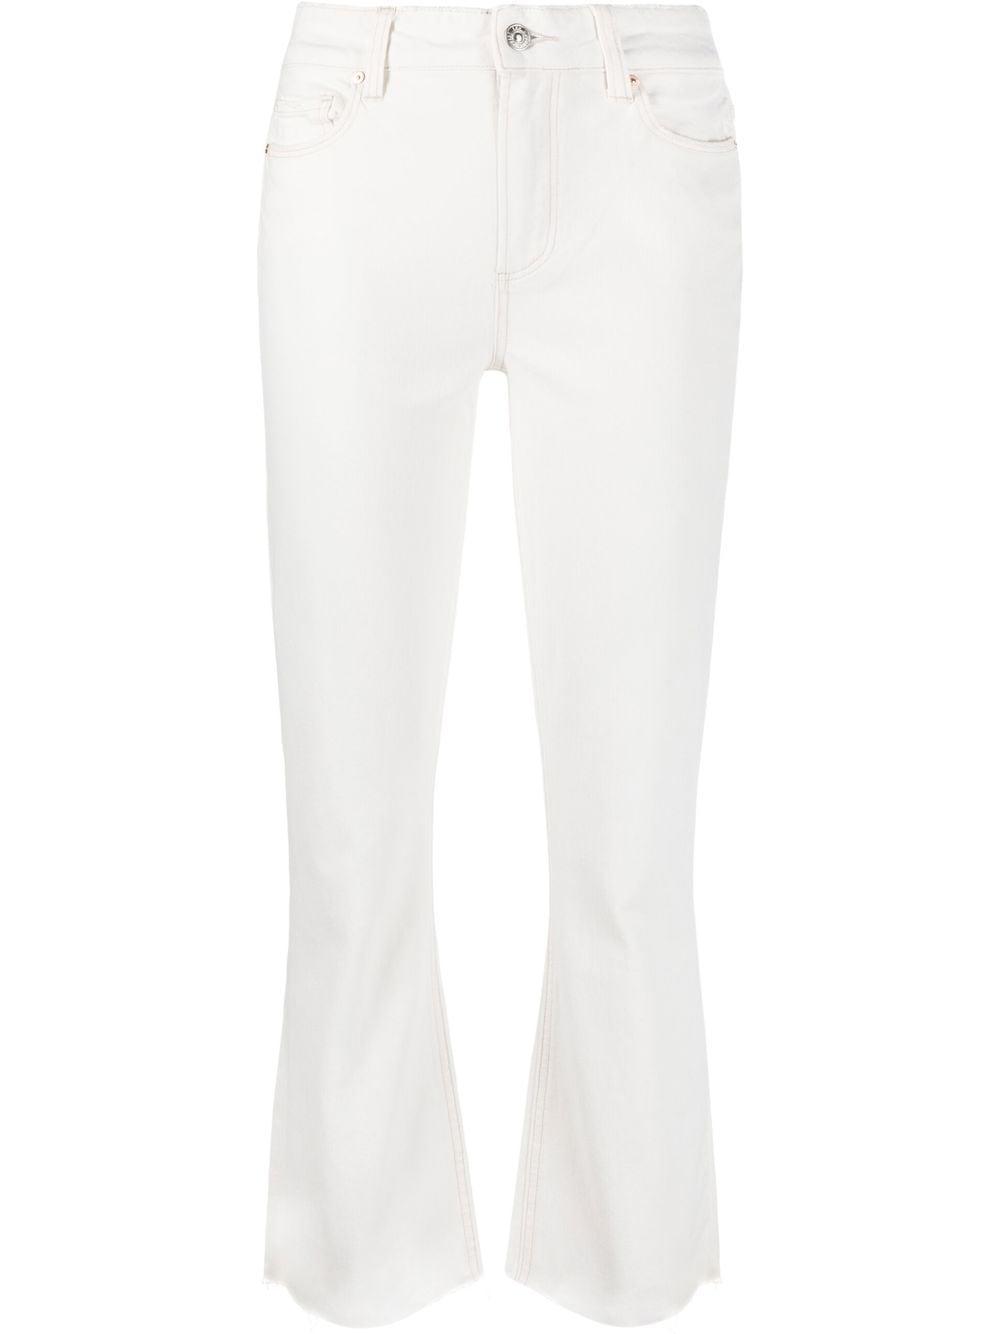 PAIGE Cropped Kick-flare Jeans in White | Lyst